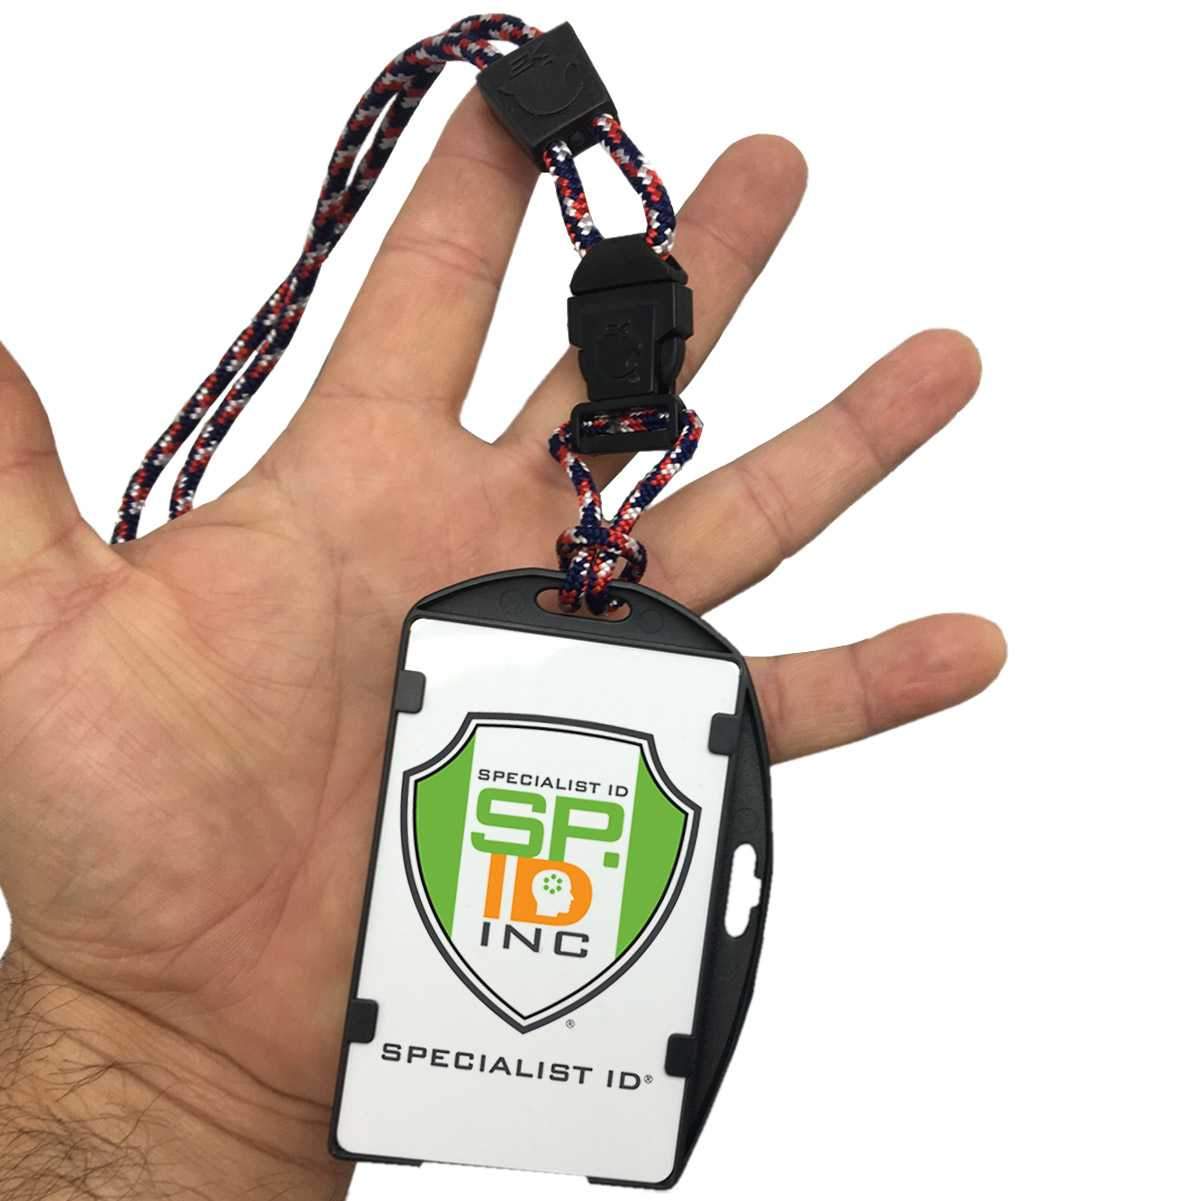 A hand holds an EK USA RFID Blocking Dual Sided Badge Holder with Heavy Duty Breakaway / Quick Release Lanyard (10943) by EK USA. The dual-sided badge holder displays the Specialist ID logo prominently.